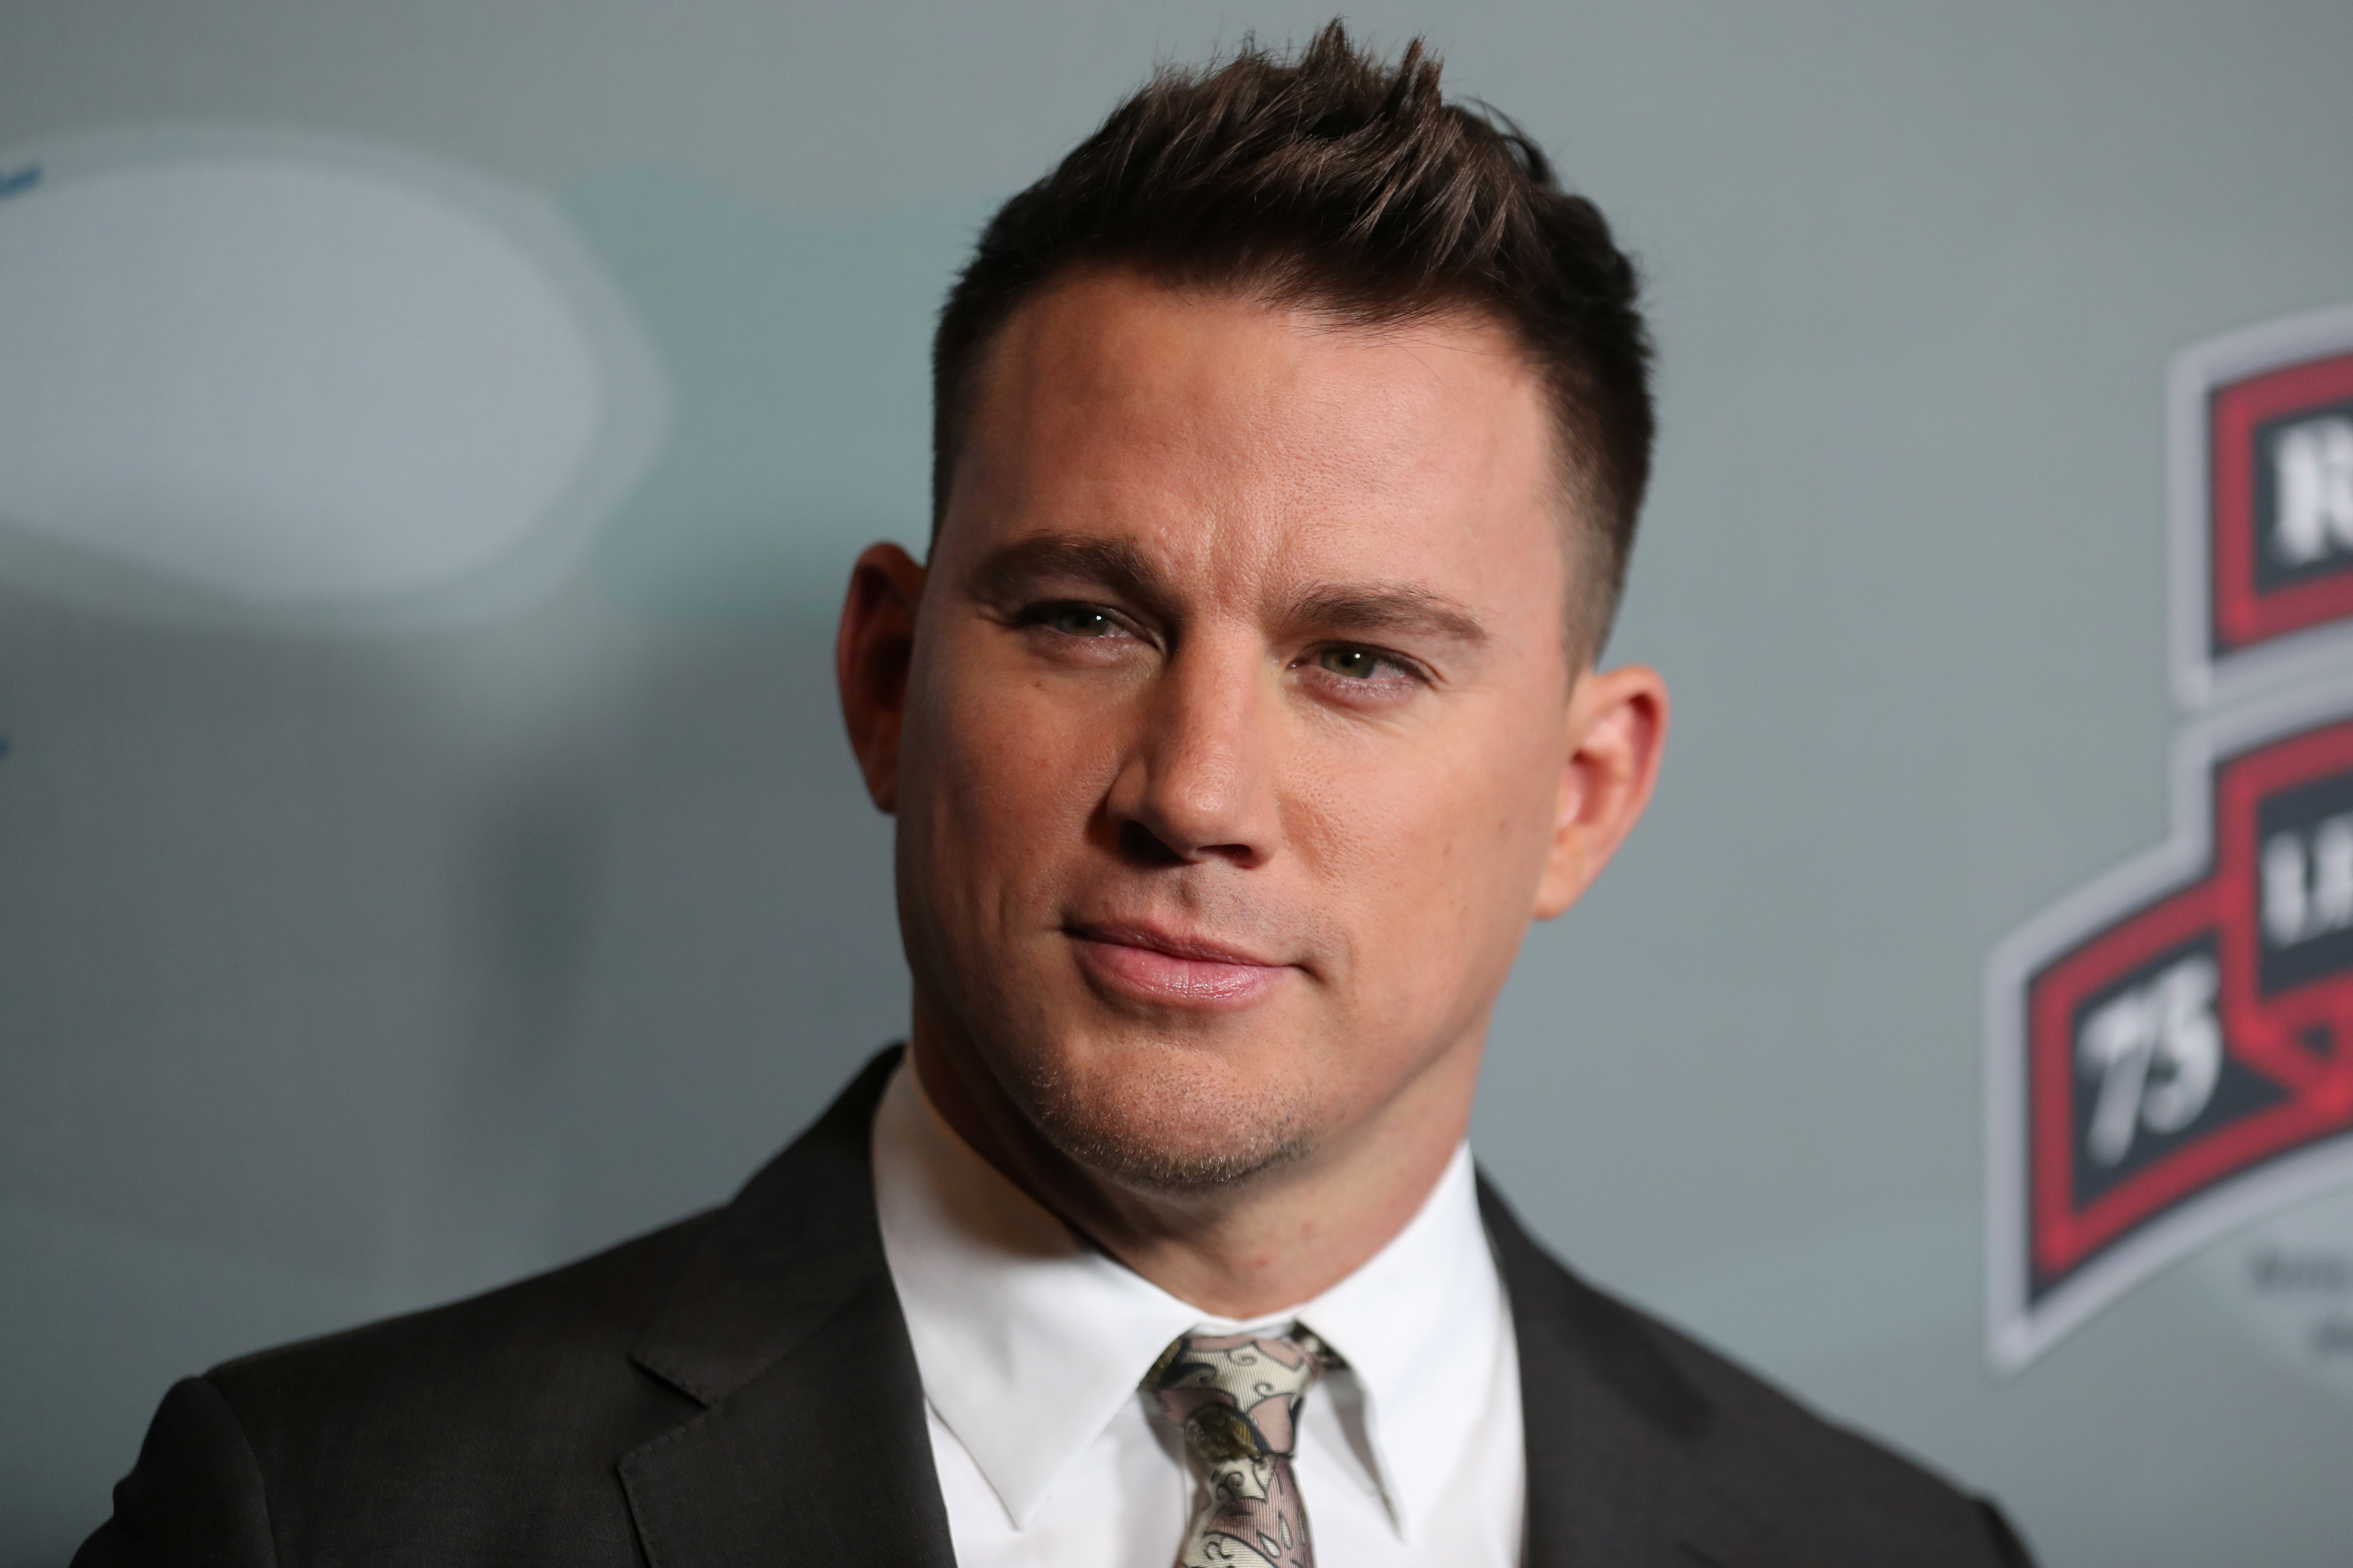 Executive Producer Channing Tatum arrives at the premiere of 